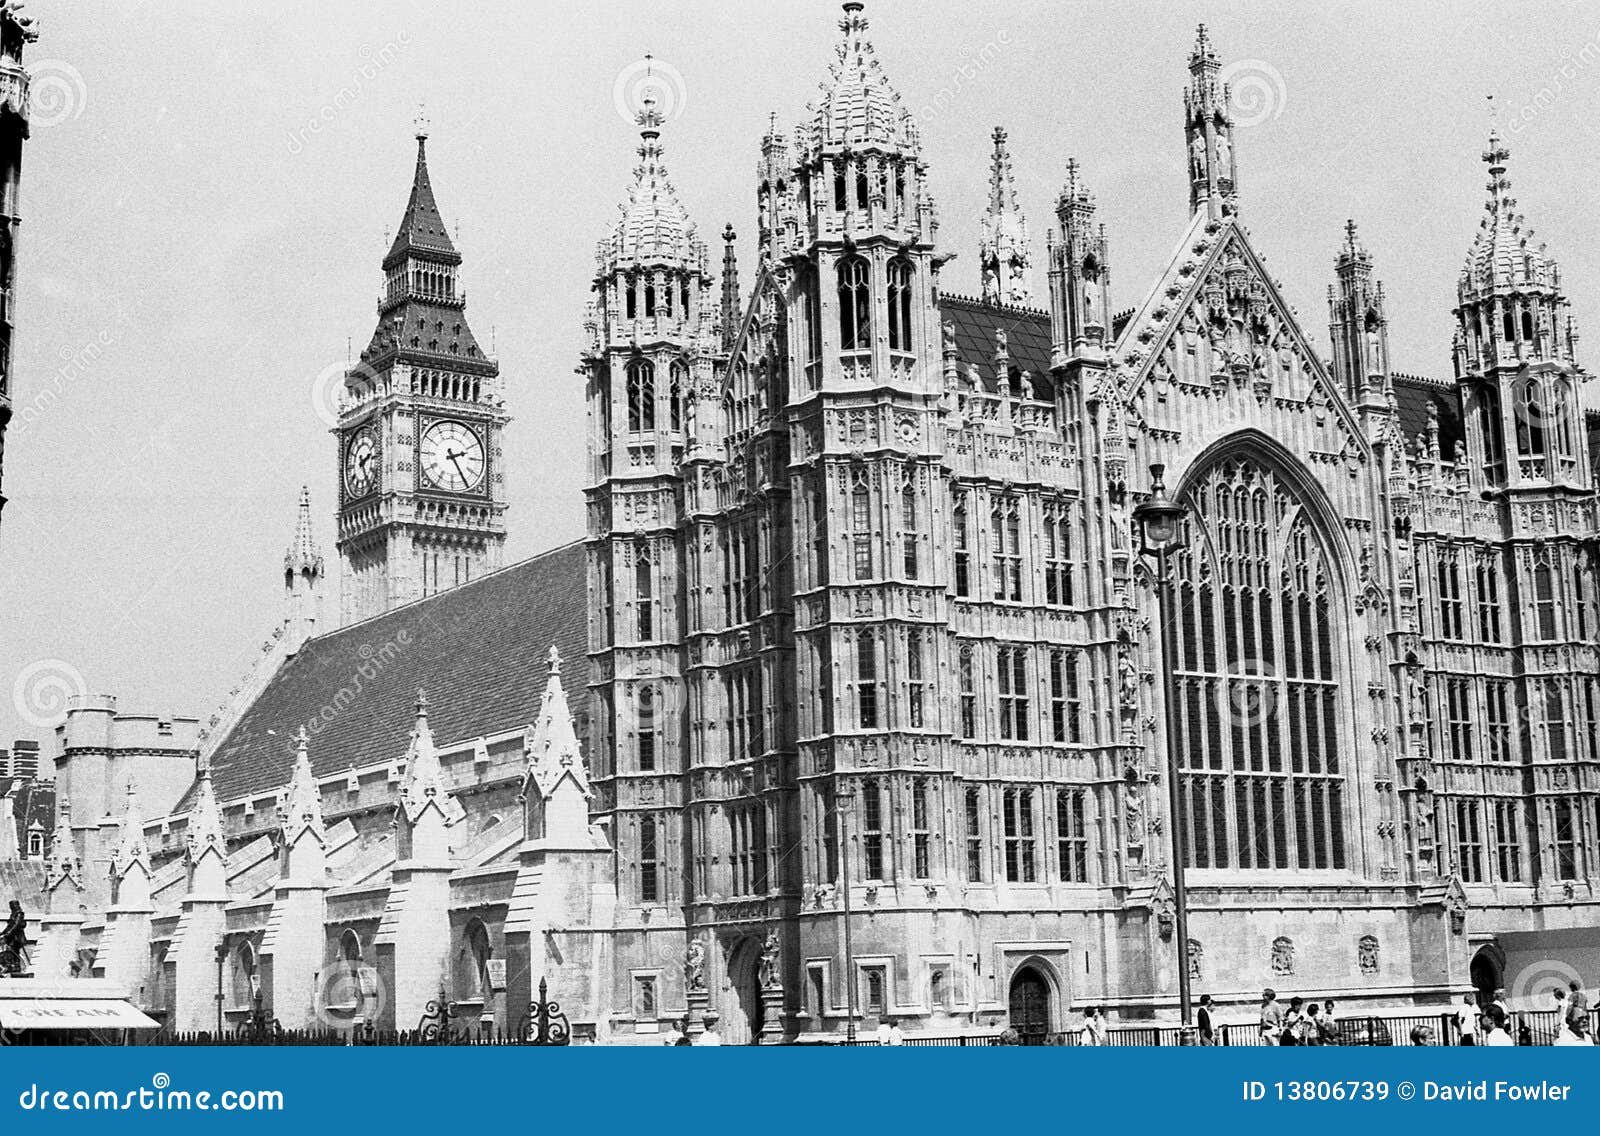 Exterior view of the Houses of Parliament in London, England on August 5, 1989.